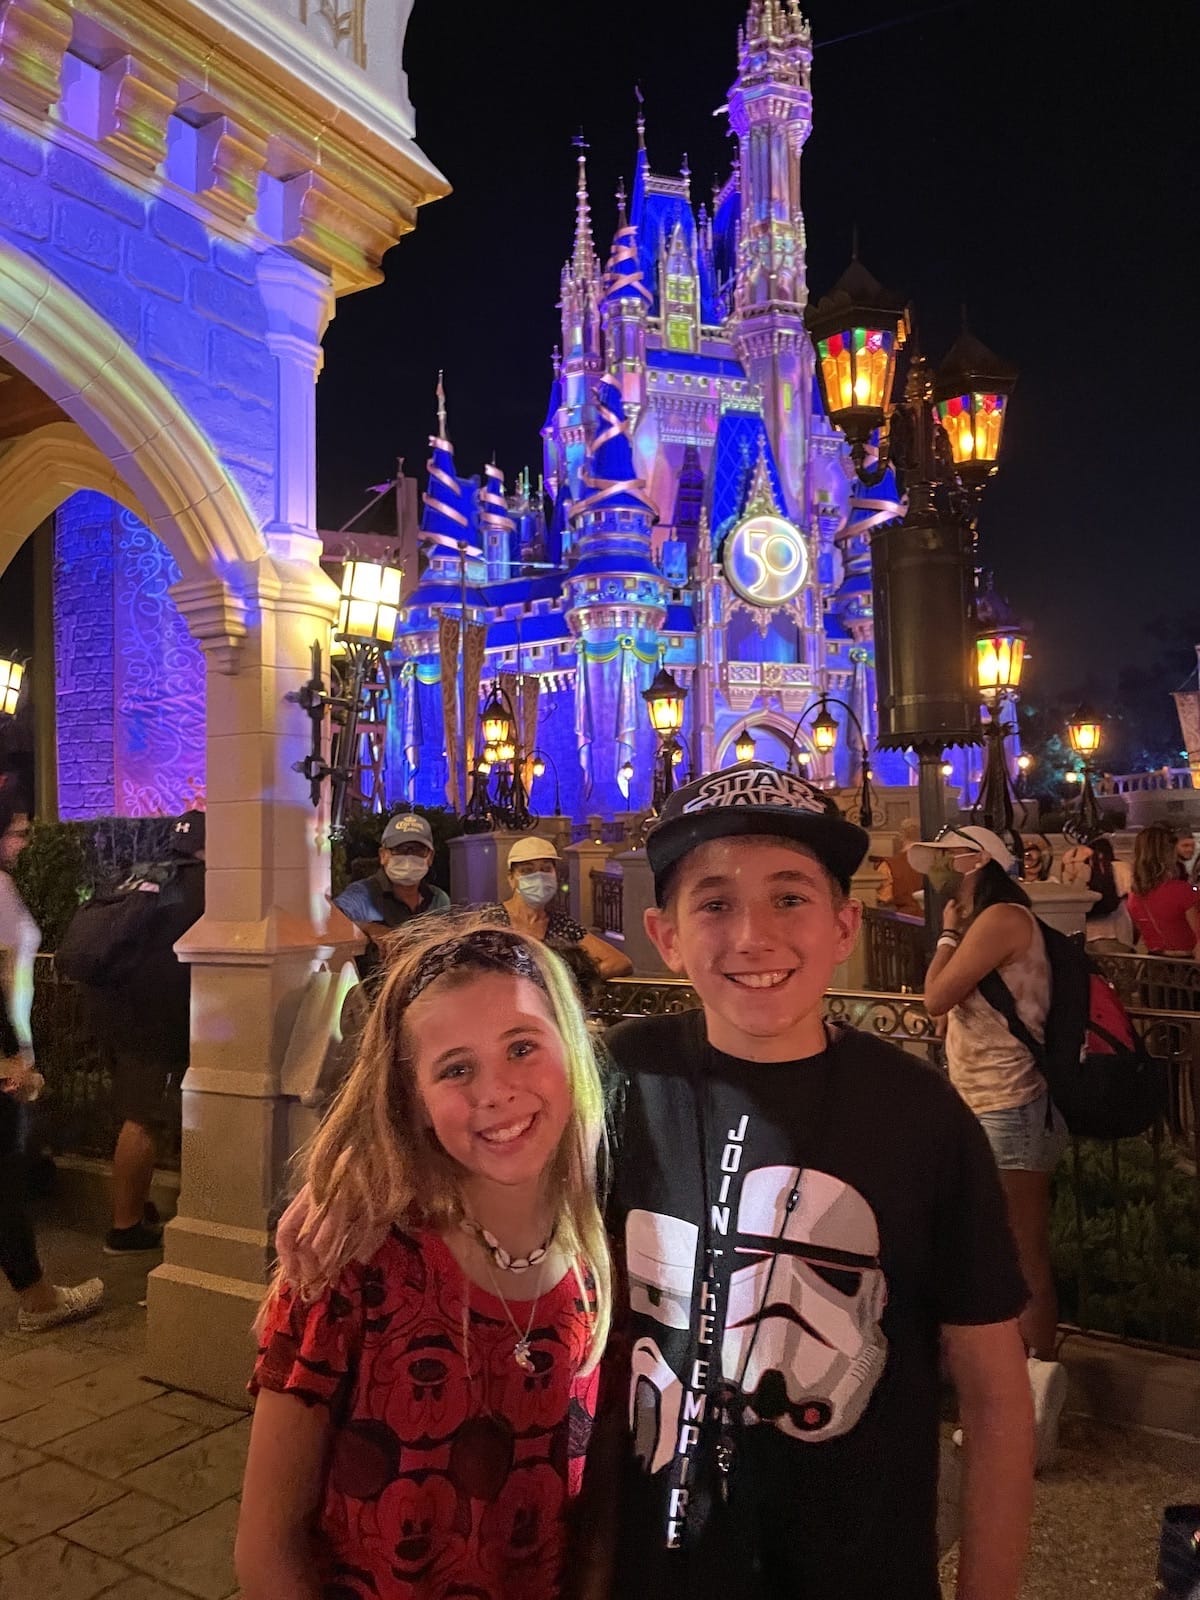 Where is the BEST Place to Watch Fireworks at Magic Kingdom? Find out the best place to watch fireworks at Magic Kingdom as well as the answer to the question: What time are fireworks at magic kingdom?